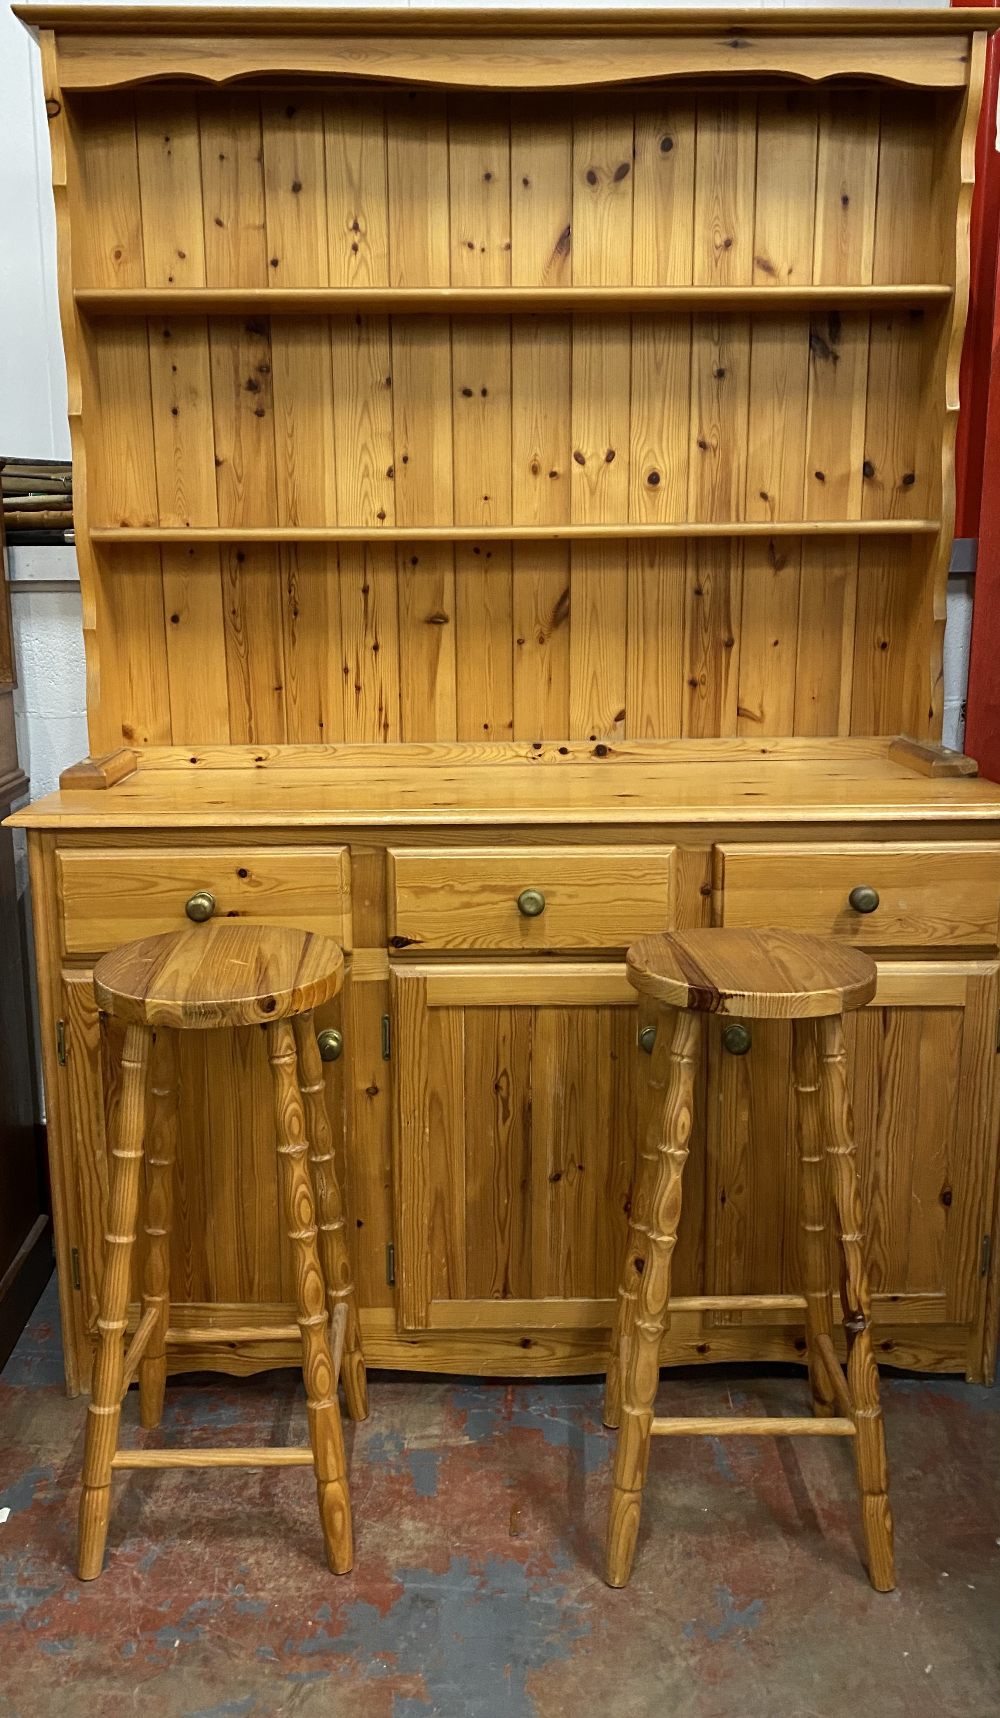 MODERN PINE FARMHOUSE DRESSER, 185cms H, 135cms W, 46cms D and two pine 'bar stools' - Image 2 of 2